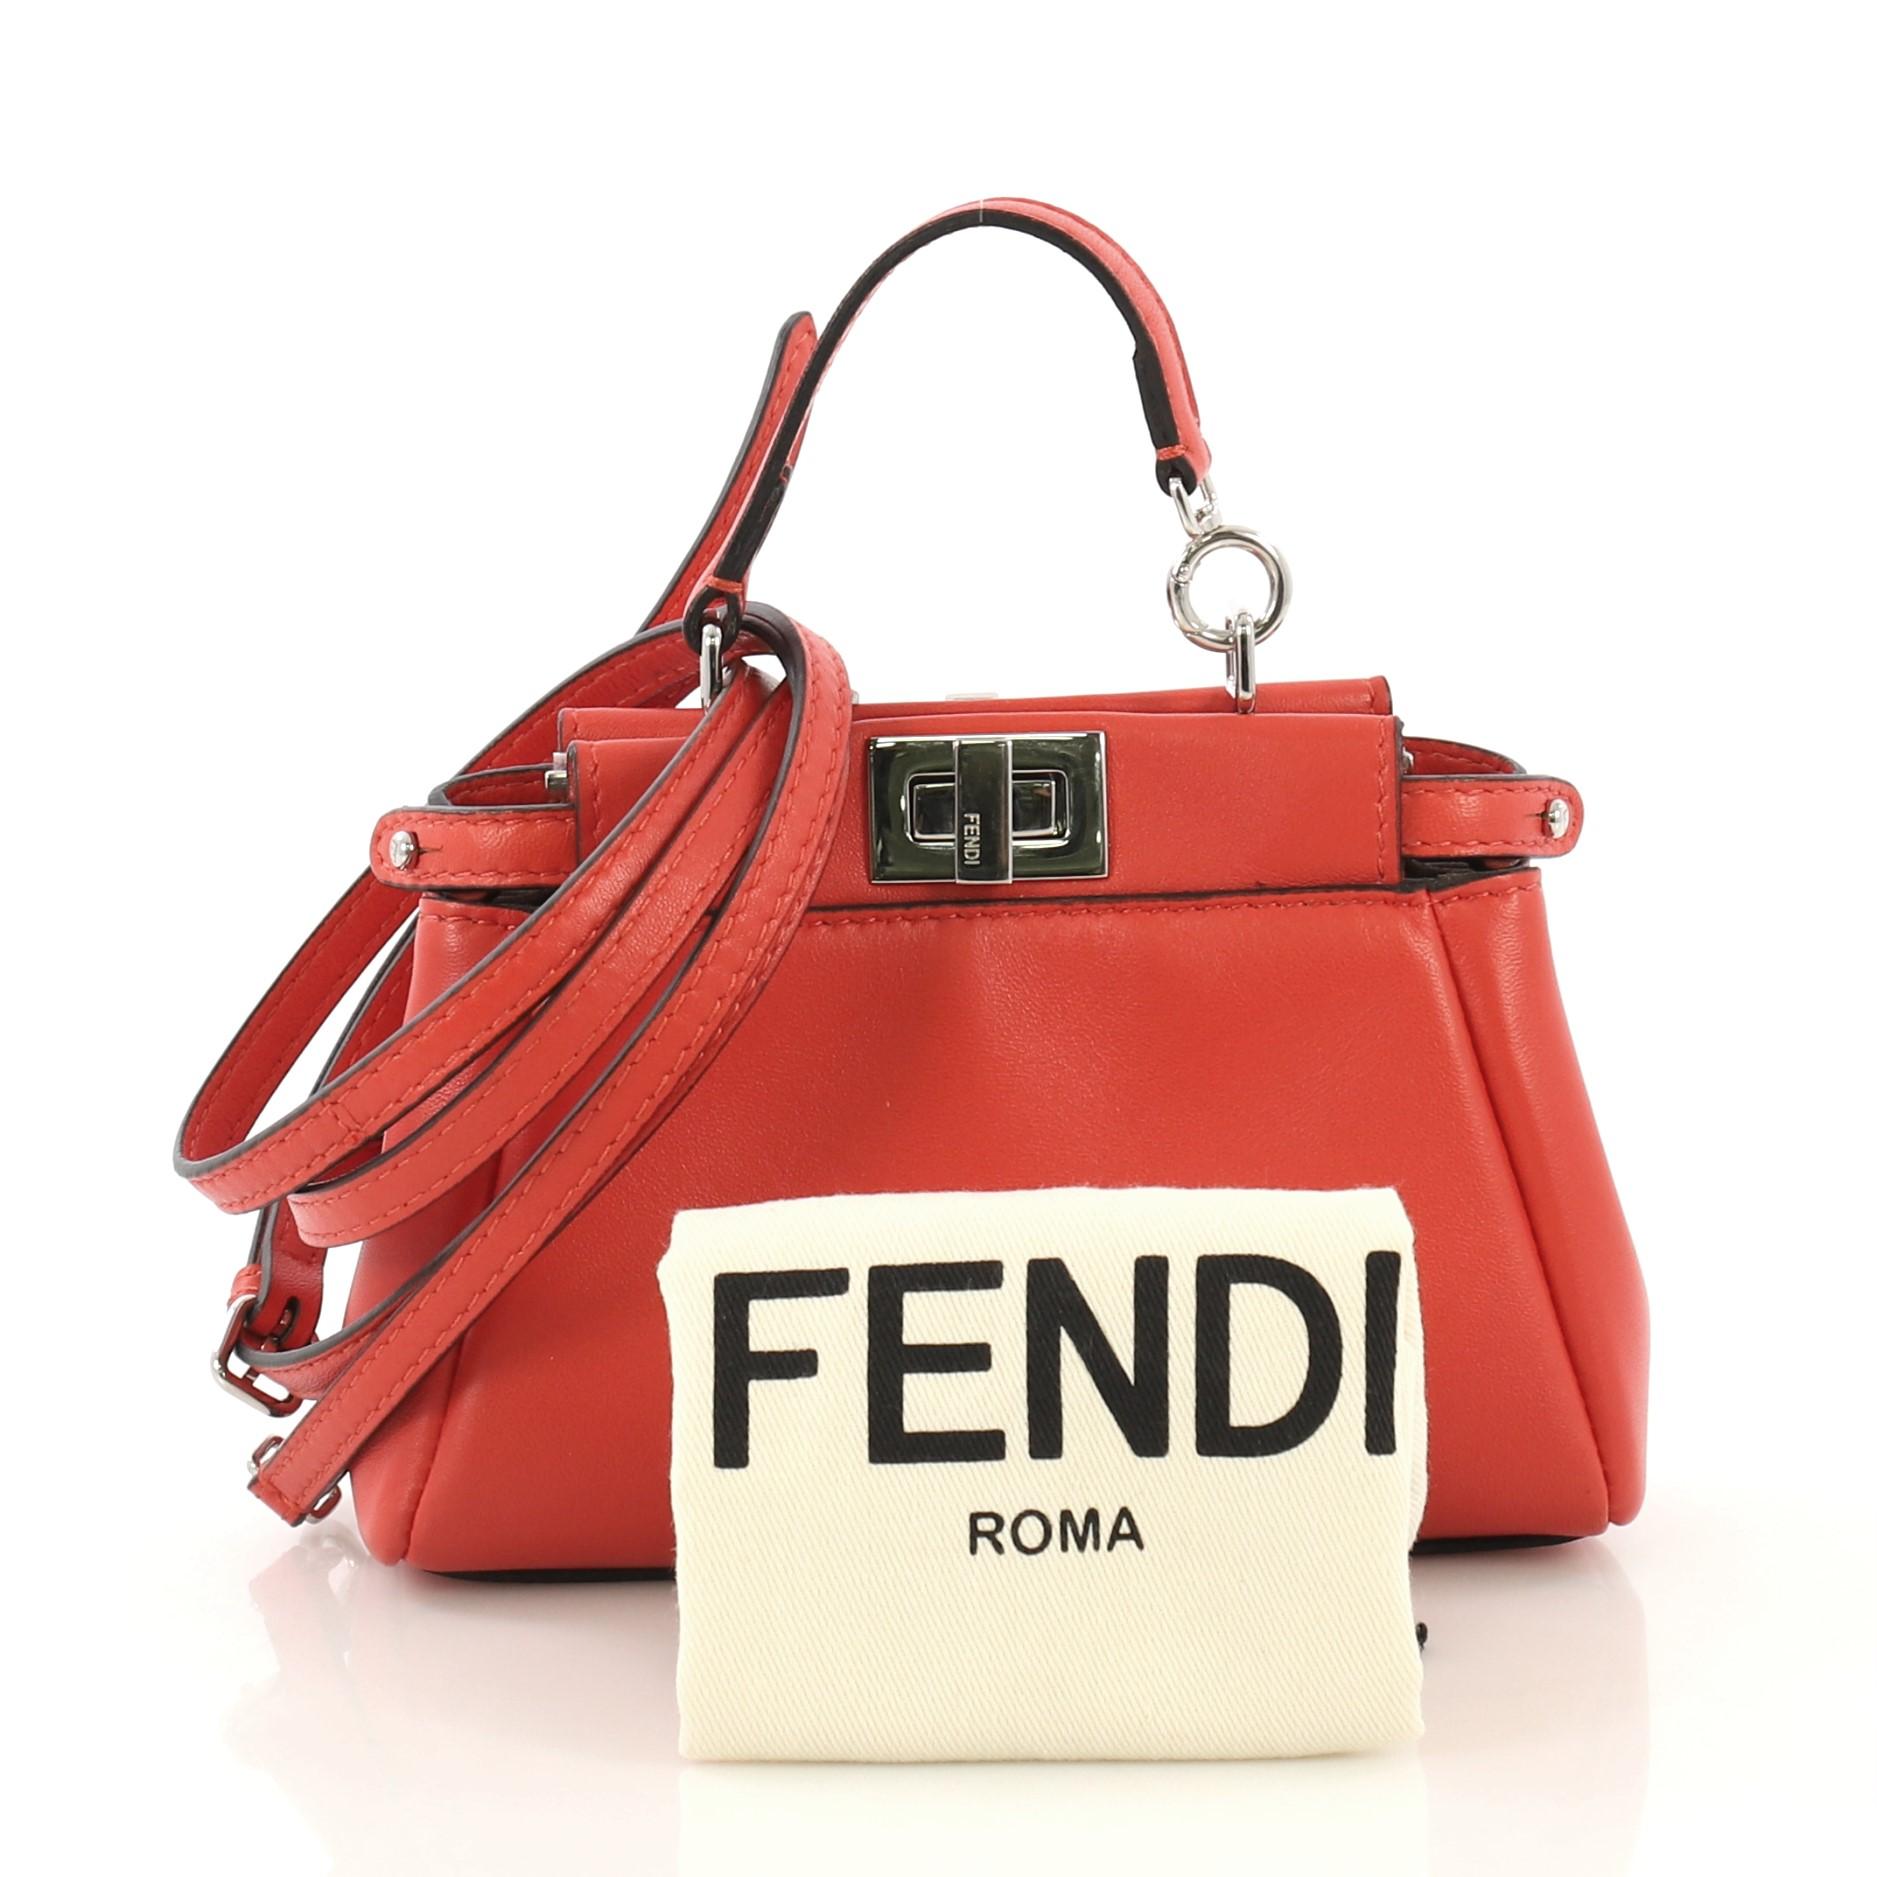 This Fendi Peekaboo Bag Leather Micro, crafted from red leather, features a top frame silhouette, flat leather handle, dual compartments with turn-lock and snap closures, and silver-tone hardware. It opens to a gray microfiber interior with side